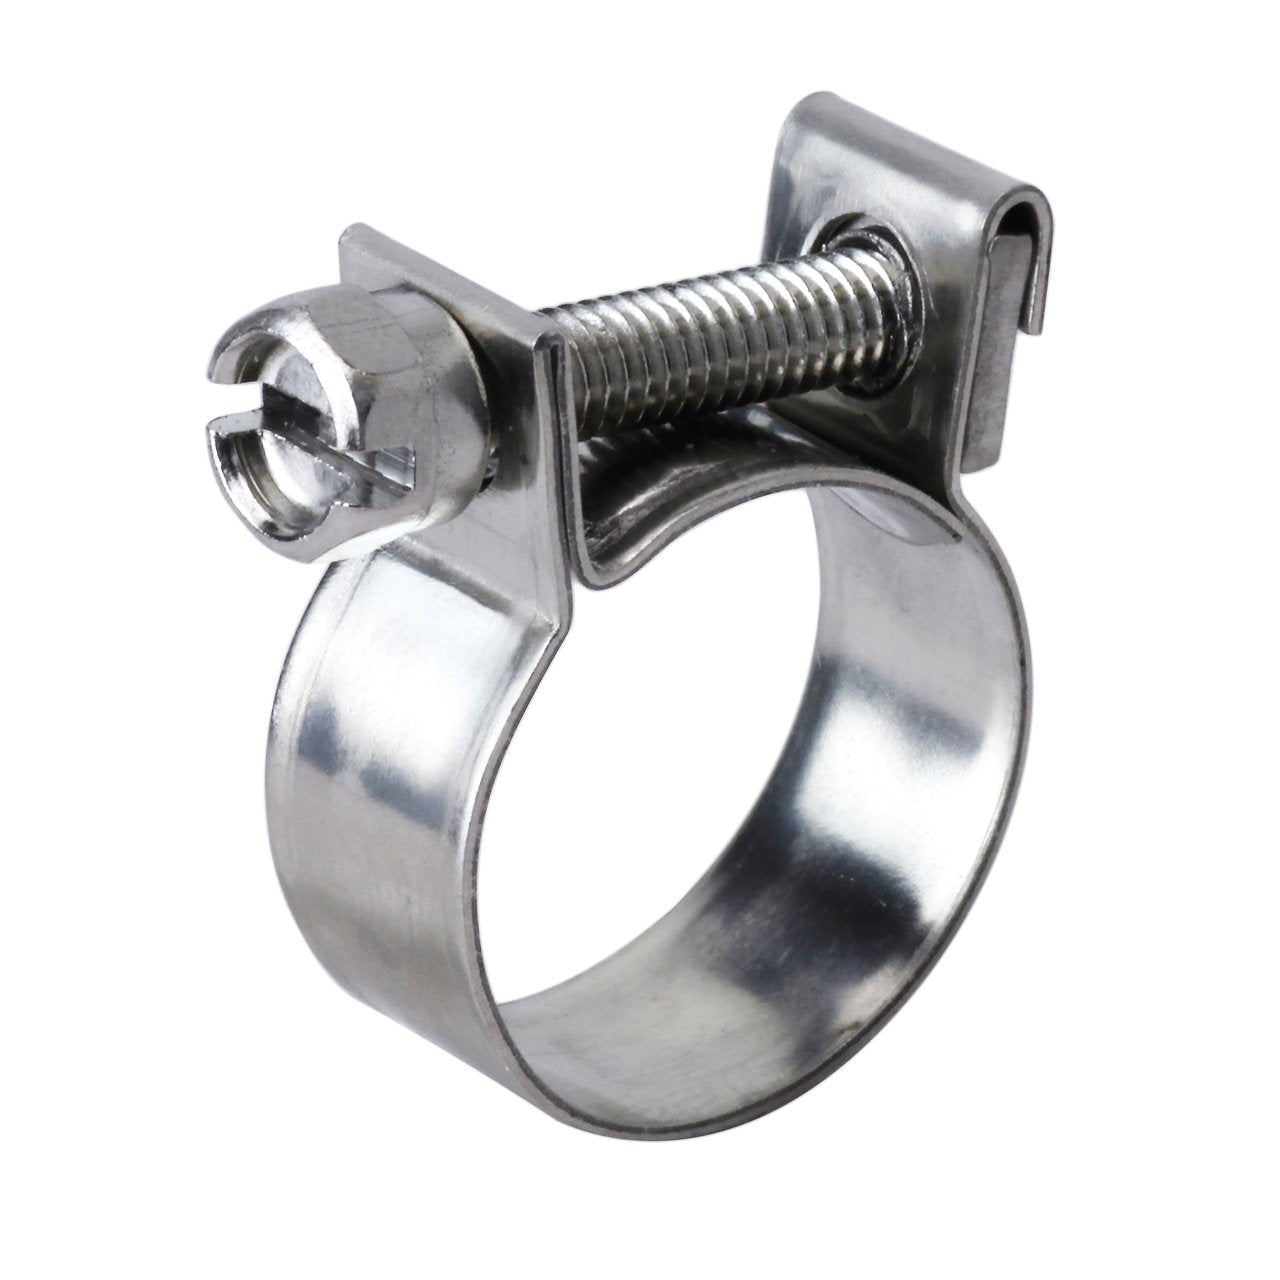 HPS SAE #15 Stainless Steel 5/16 Fuel Injection hose clamps 13mm-15mm -  HPS Performance